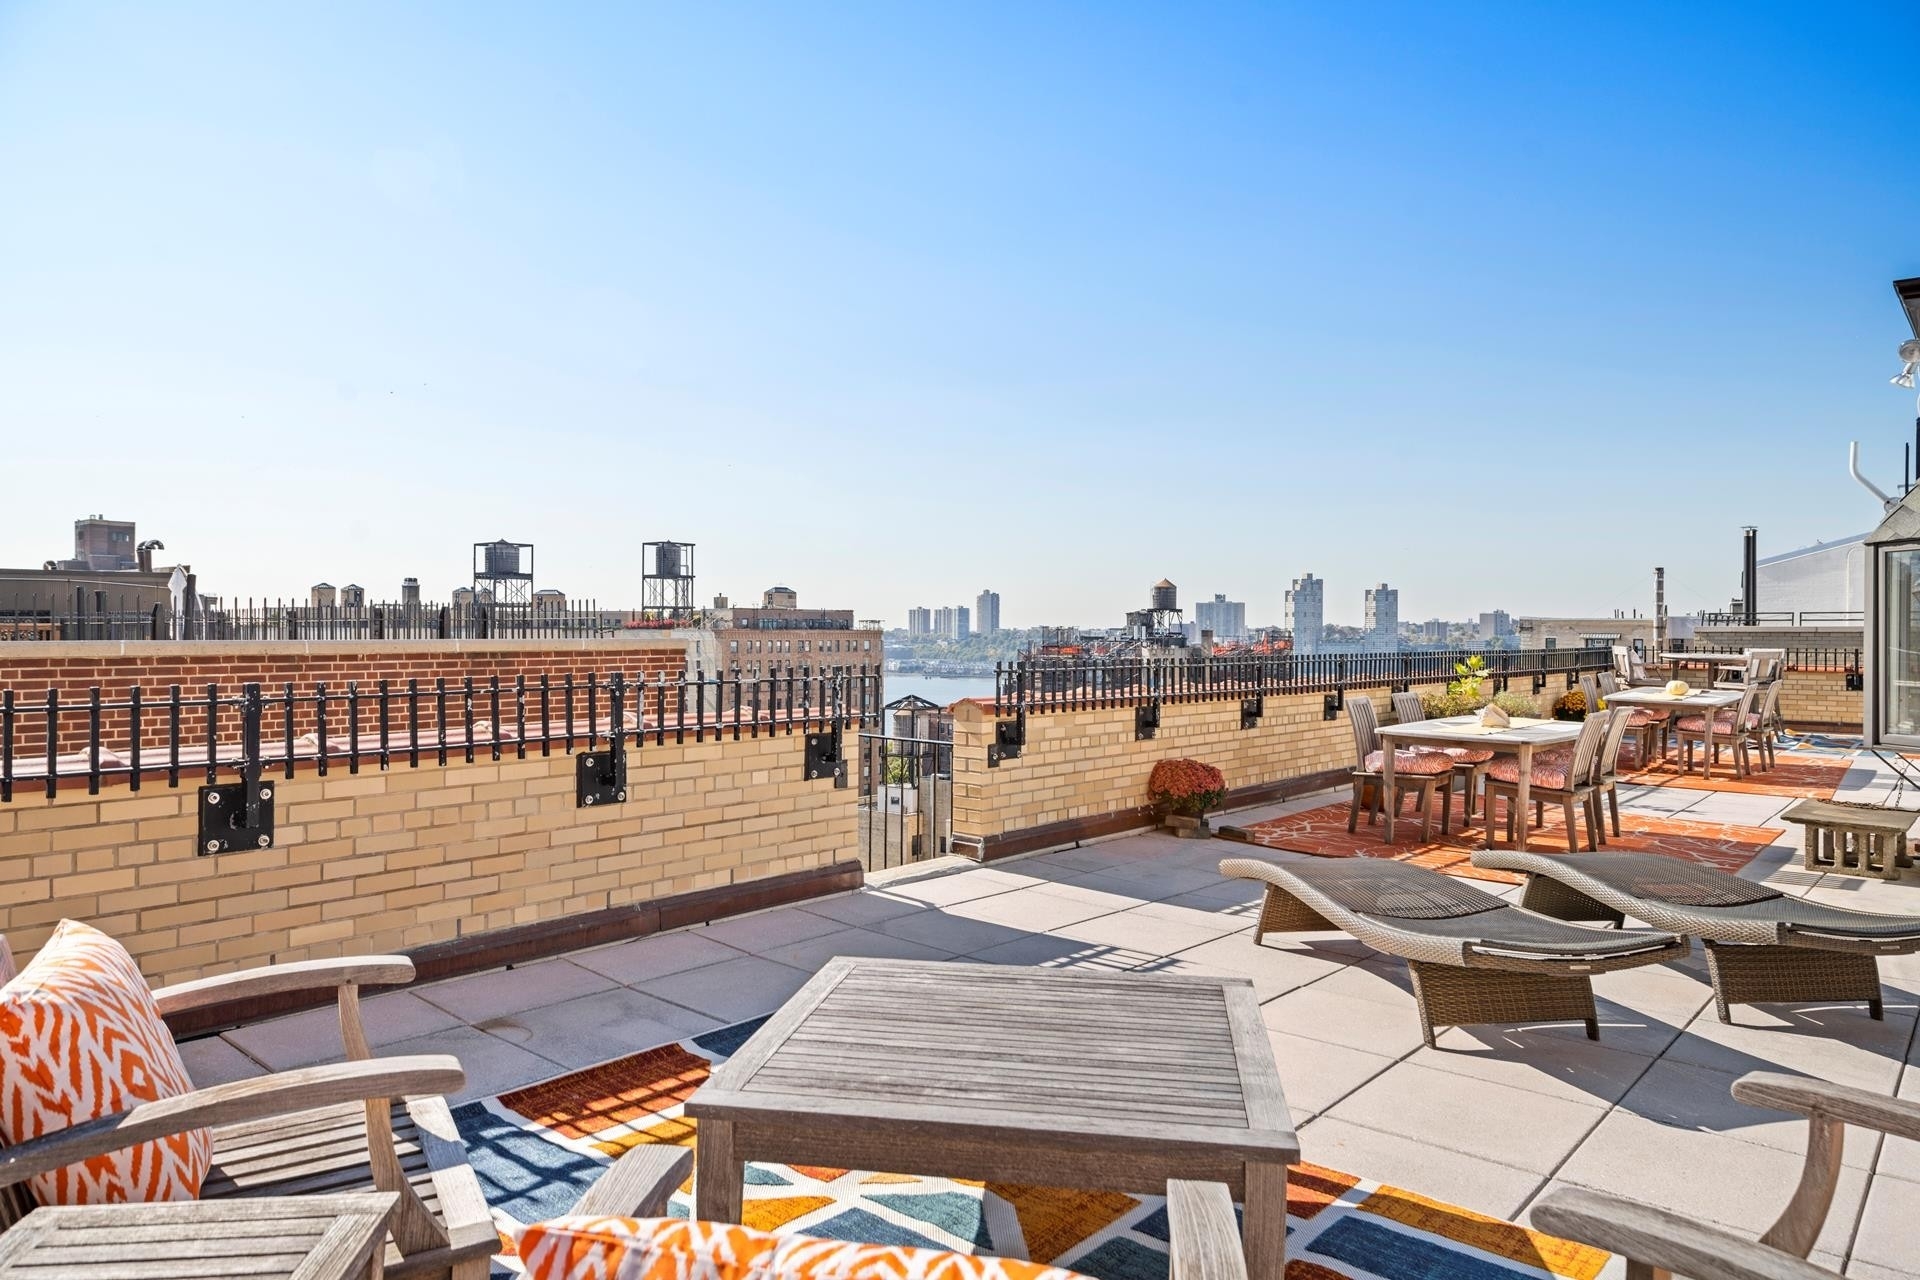 Co-op Properties for Sale at The Royal Summit Ii, 302 W 86TH ST, PH Upper West Side, New York, NY 10024